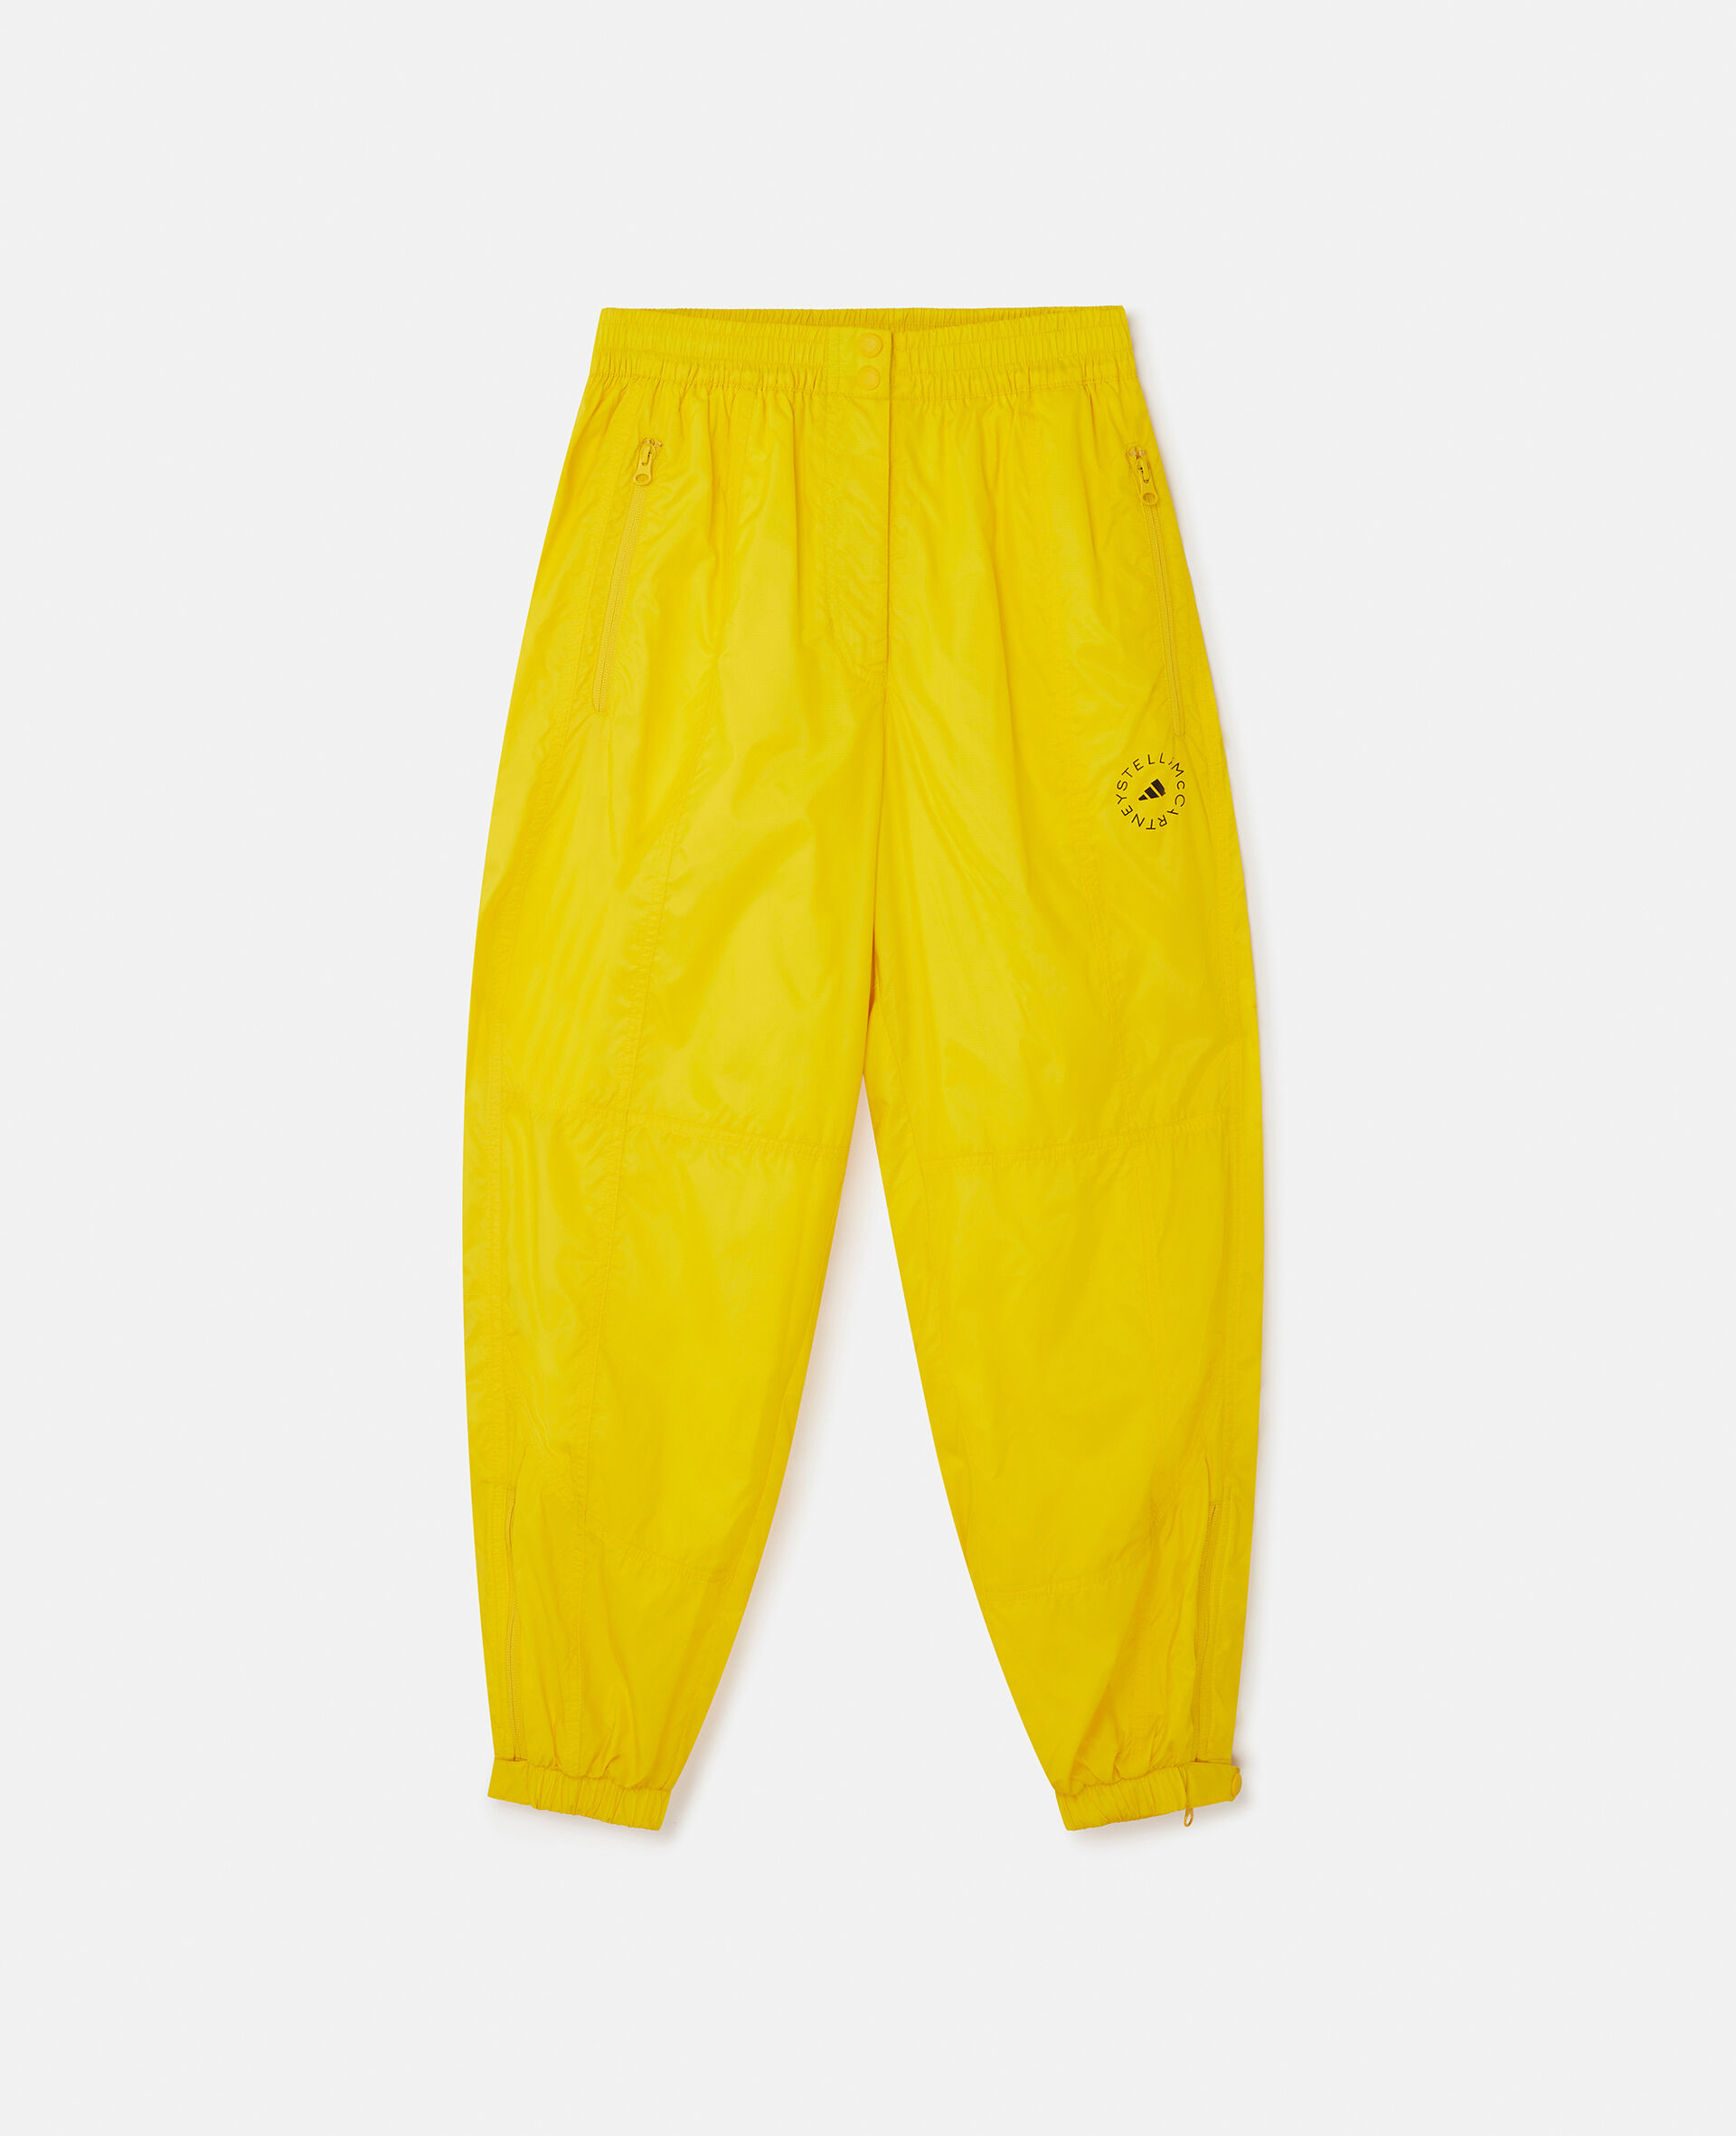 WIND.RDY Lined Trousers-Yellow-large image number 0